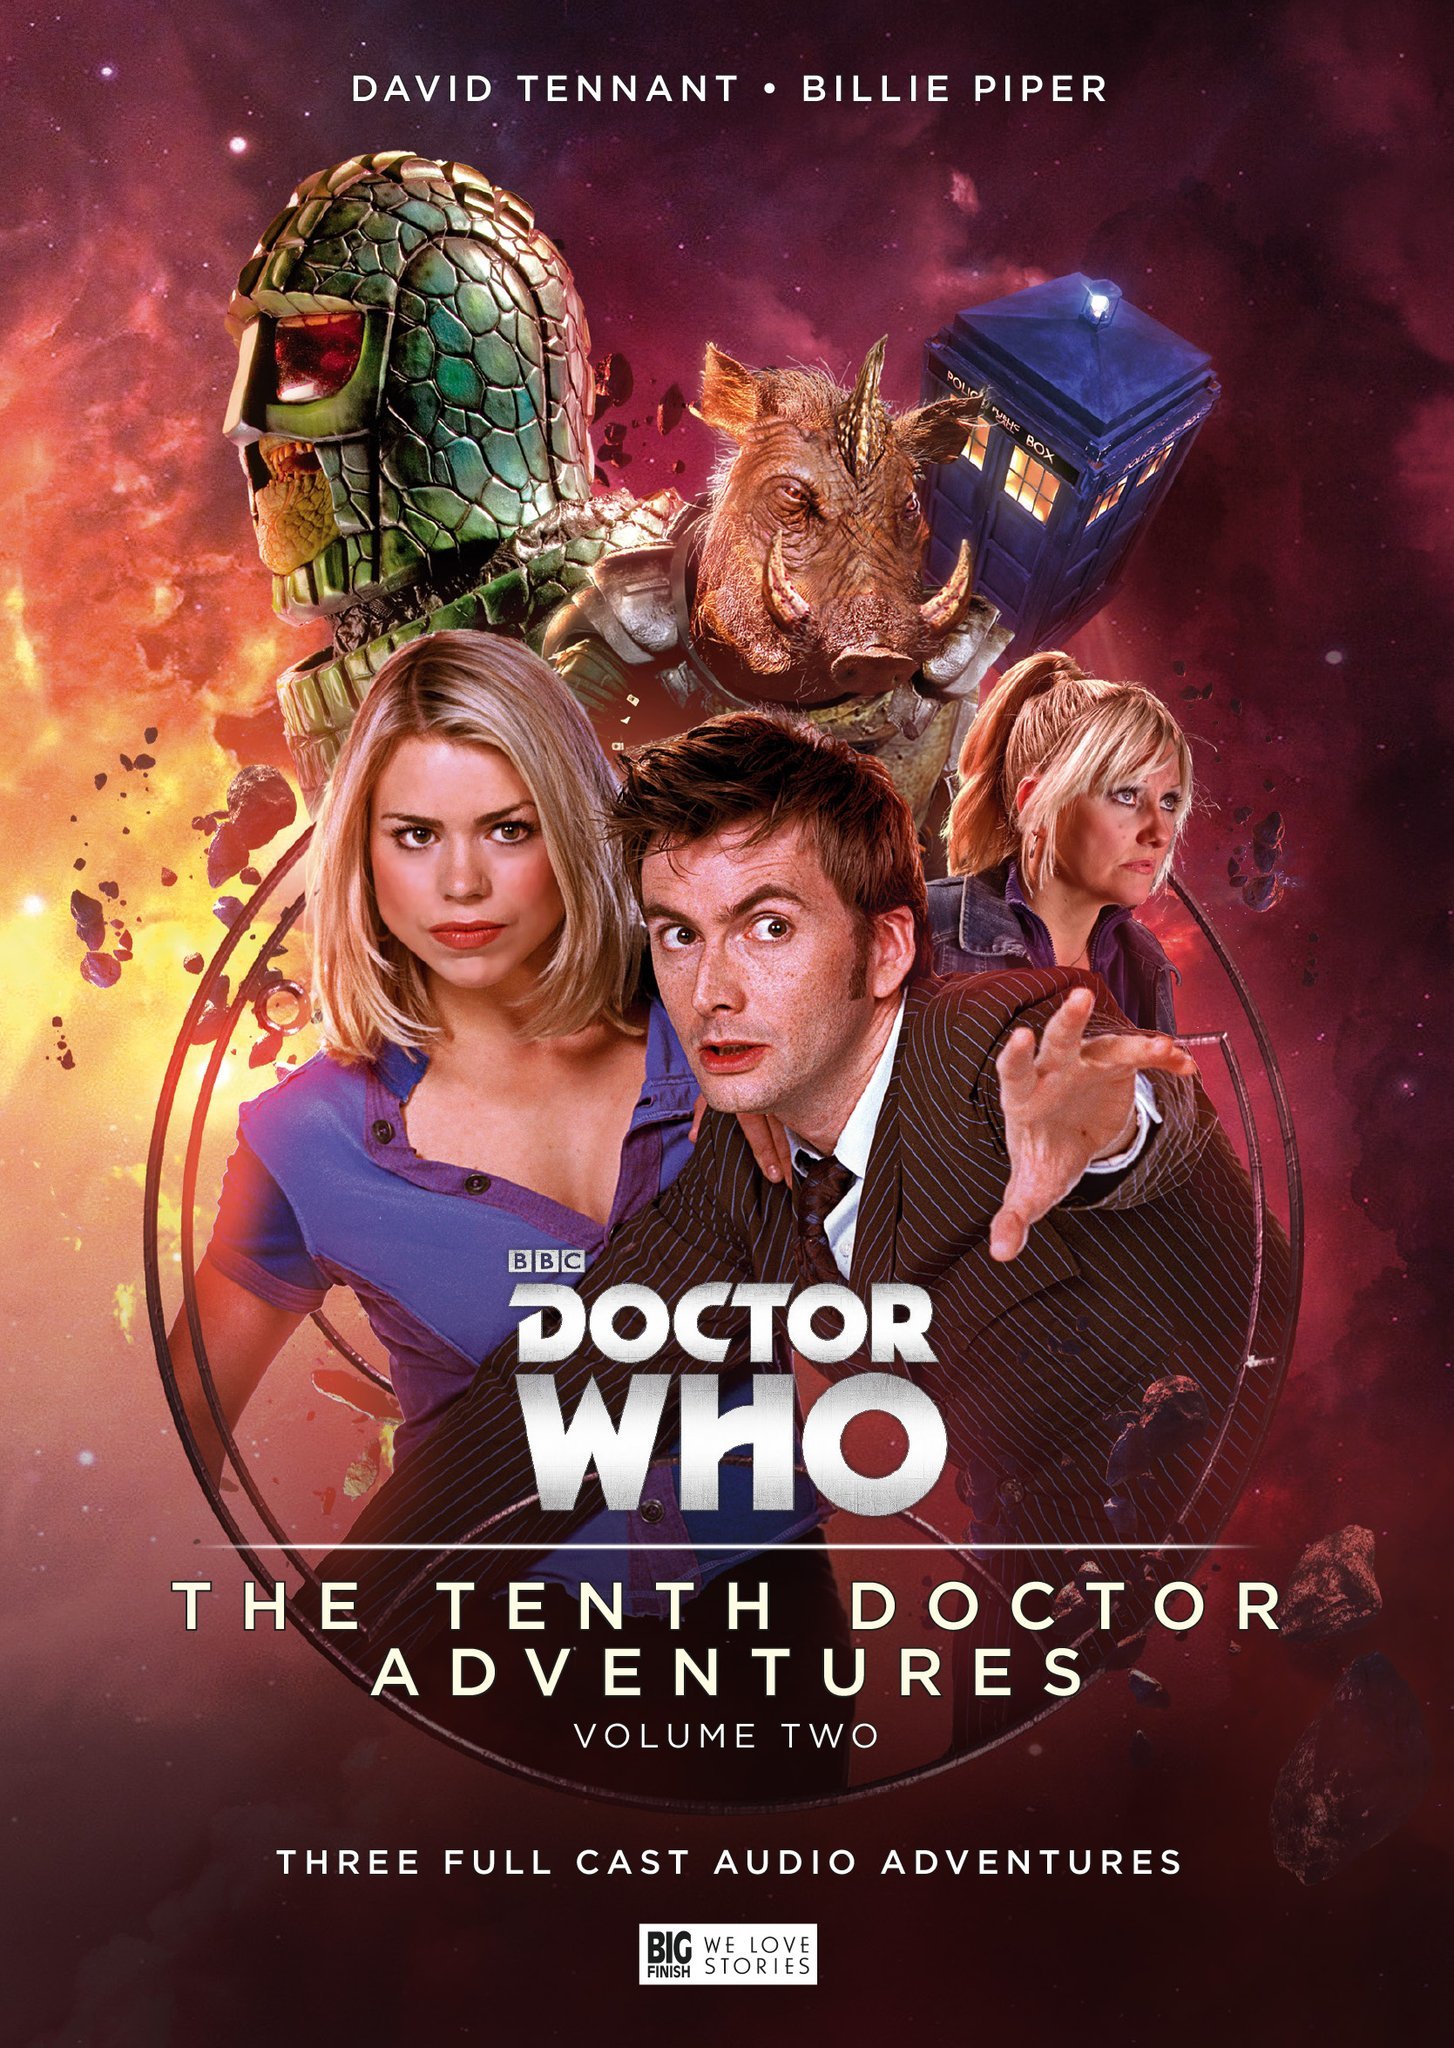 Doctor Who: The Tenth Doctor Adventures Volume 2 (AudiobookFormat, Big Finish Productions)